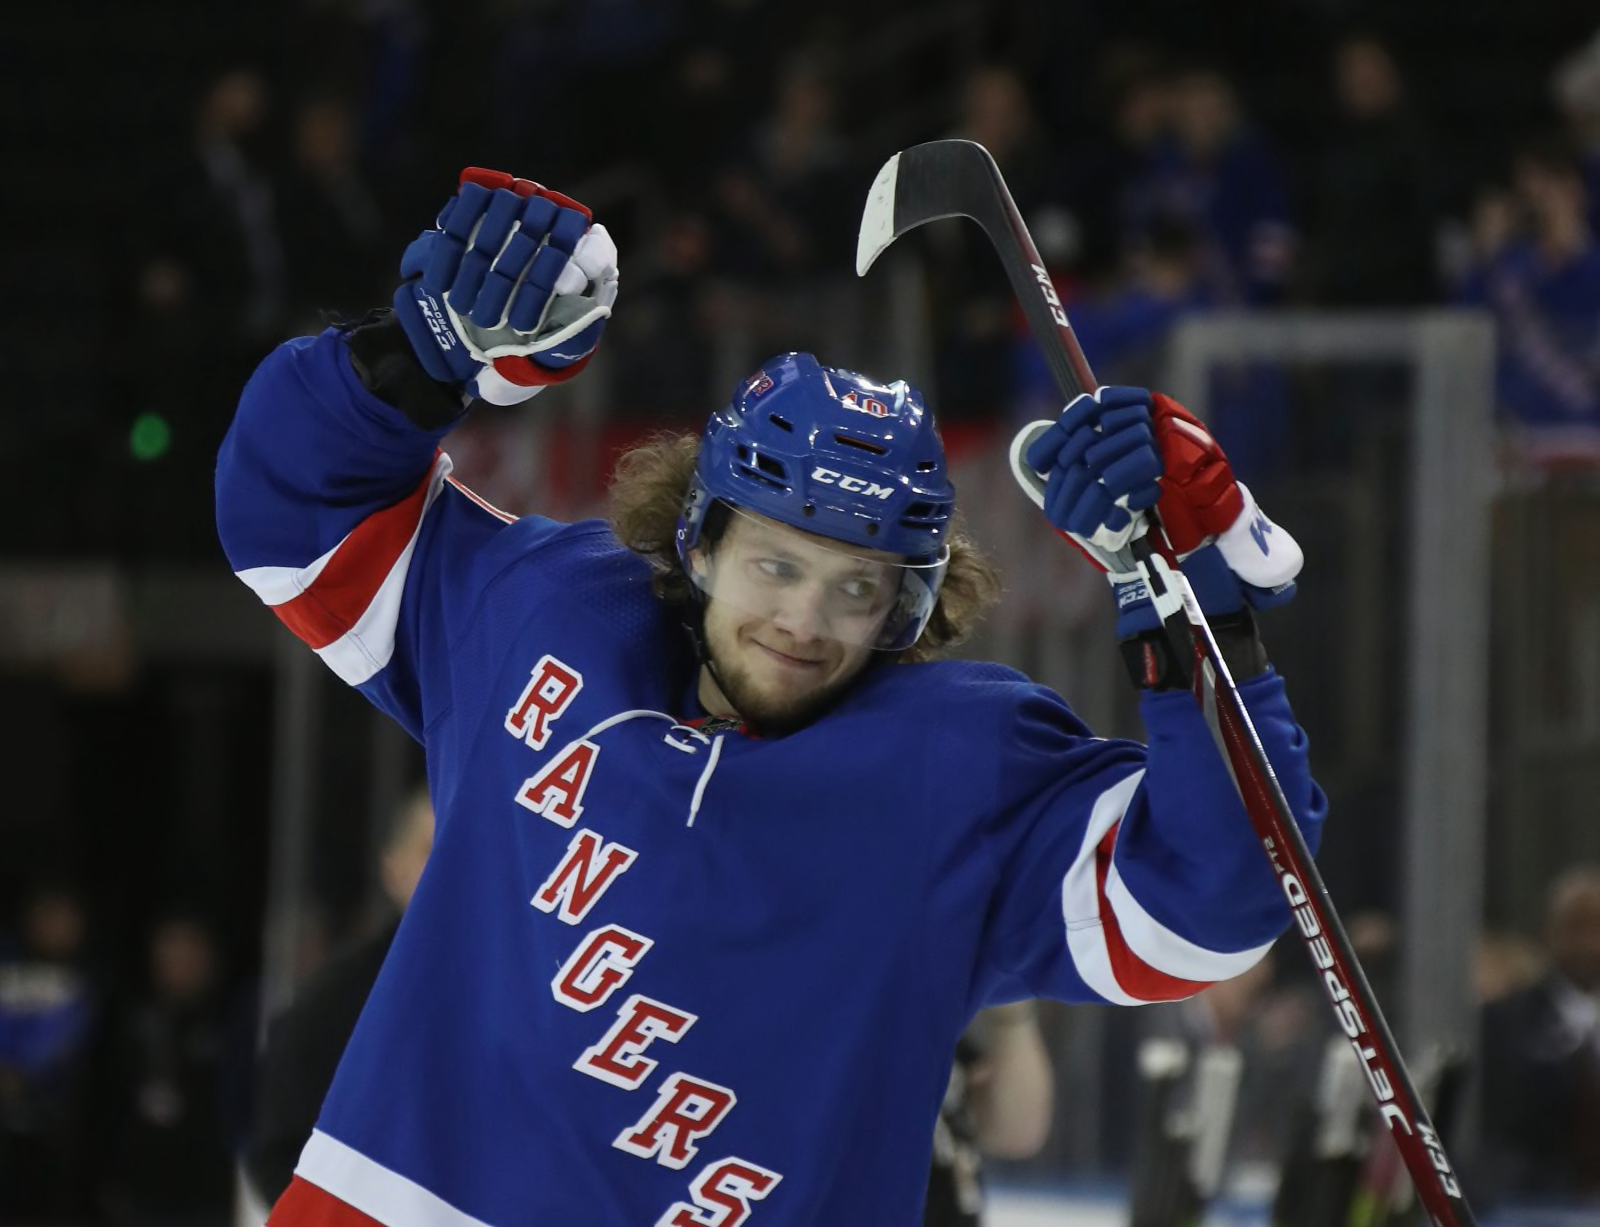 NY Rangers forward Artemi Panarin named finalist for the Hart Trophy